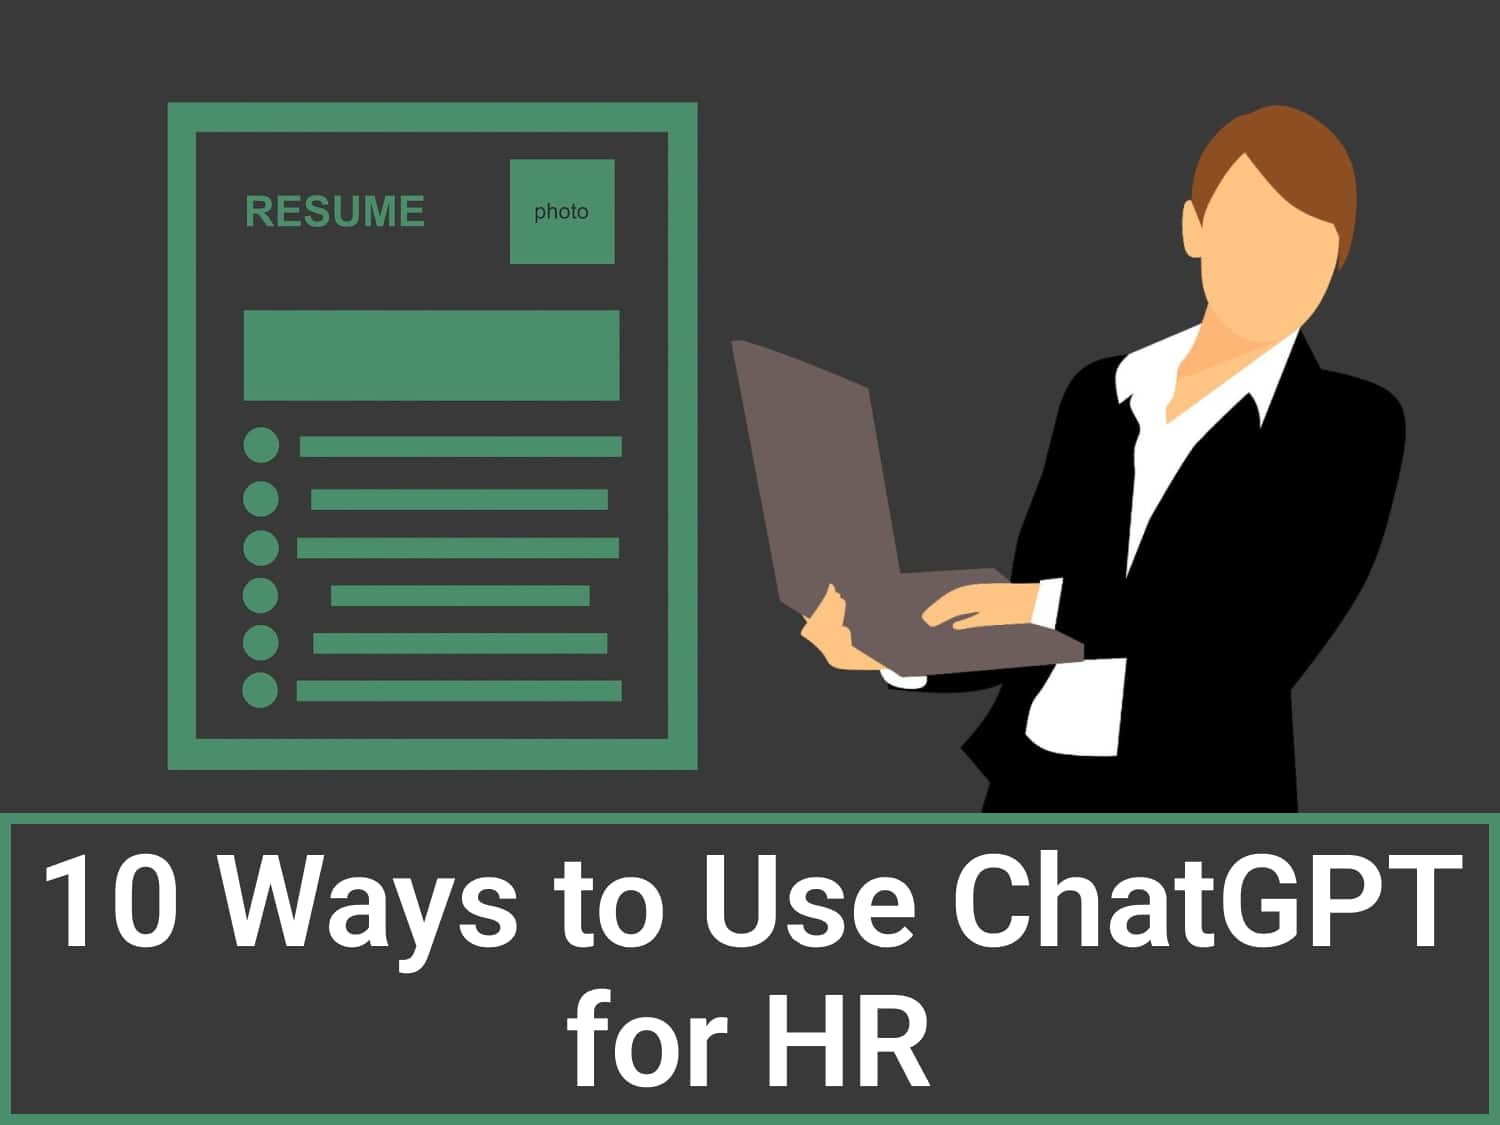 How to use ChatGPT for HR